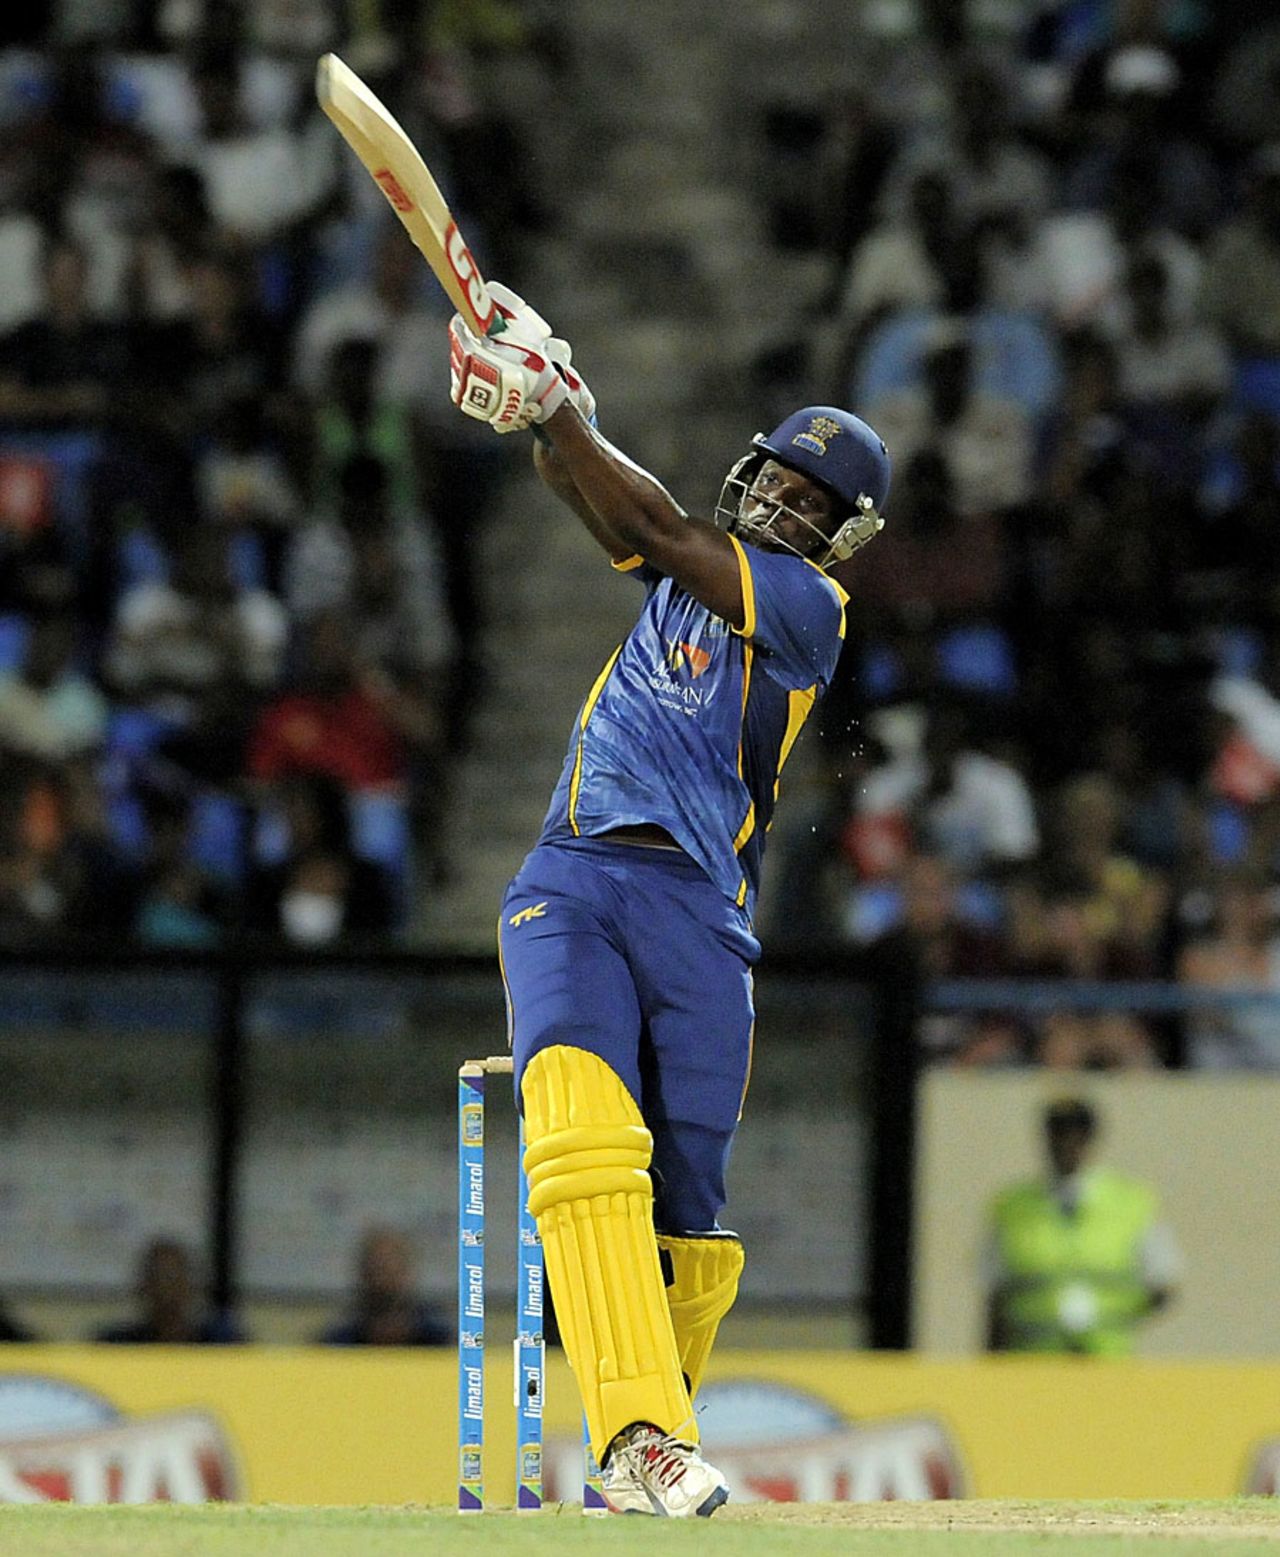 Raymon Reifer goes over the top, Antigua Hawksbills v Barbados Tridents, CPL, North Sound, August 13, 2013